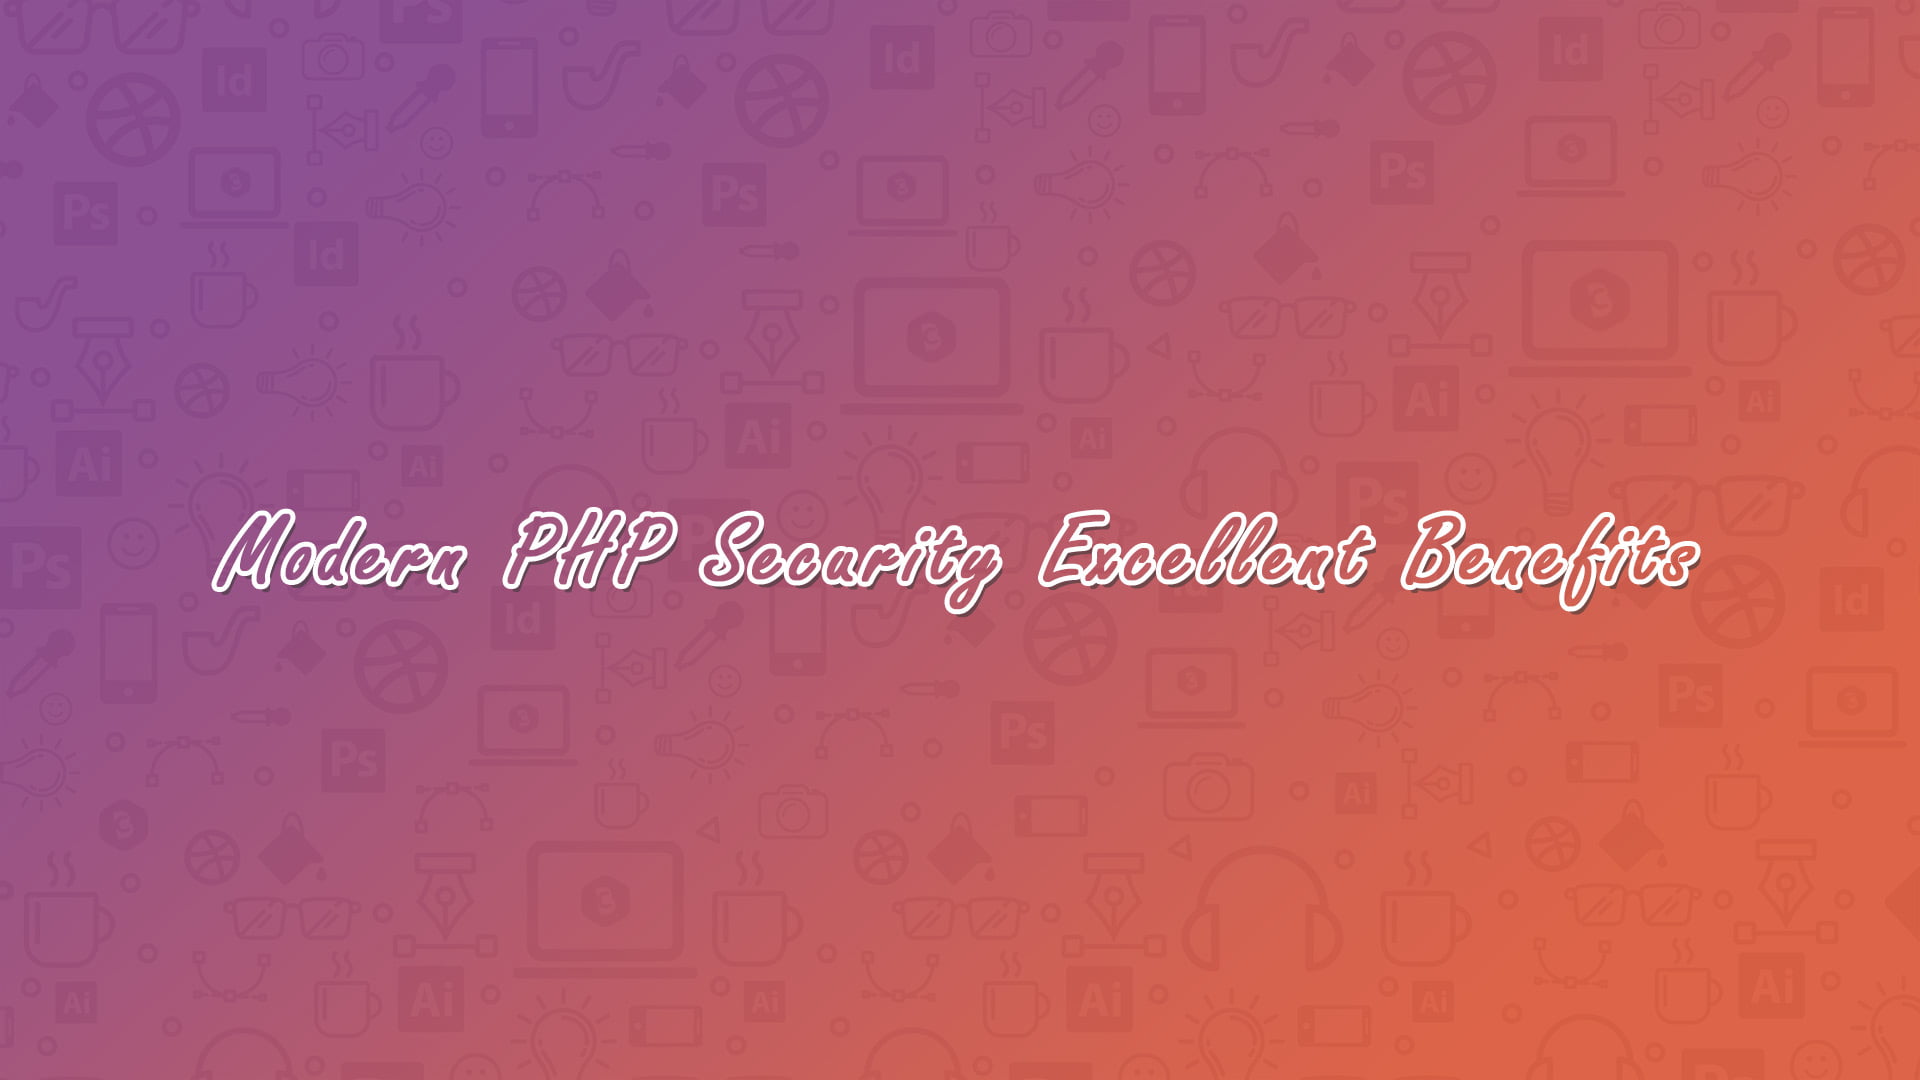 Modern PHP Security Excellent Benefits